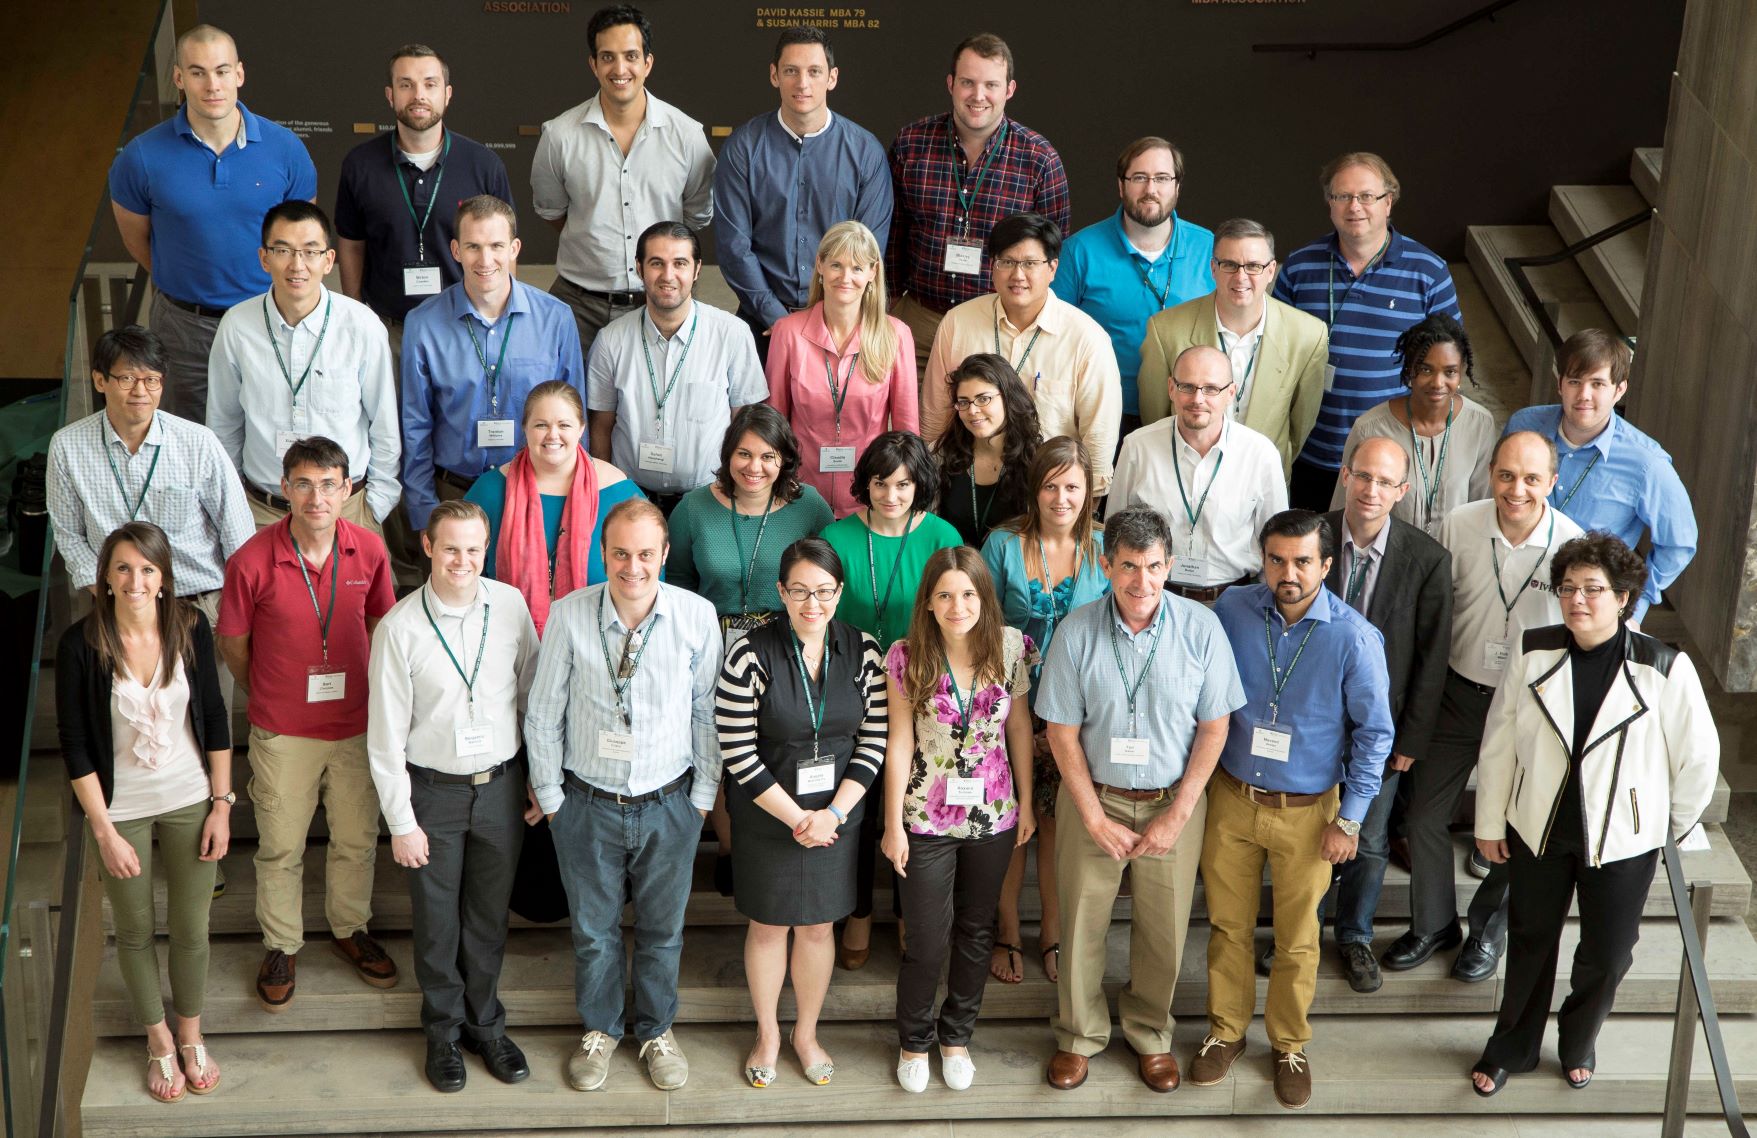 Group of PhD students and faculty at Babson ConferenceGroup of PhD students and faculty at Babson Conference